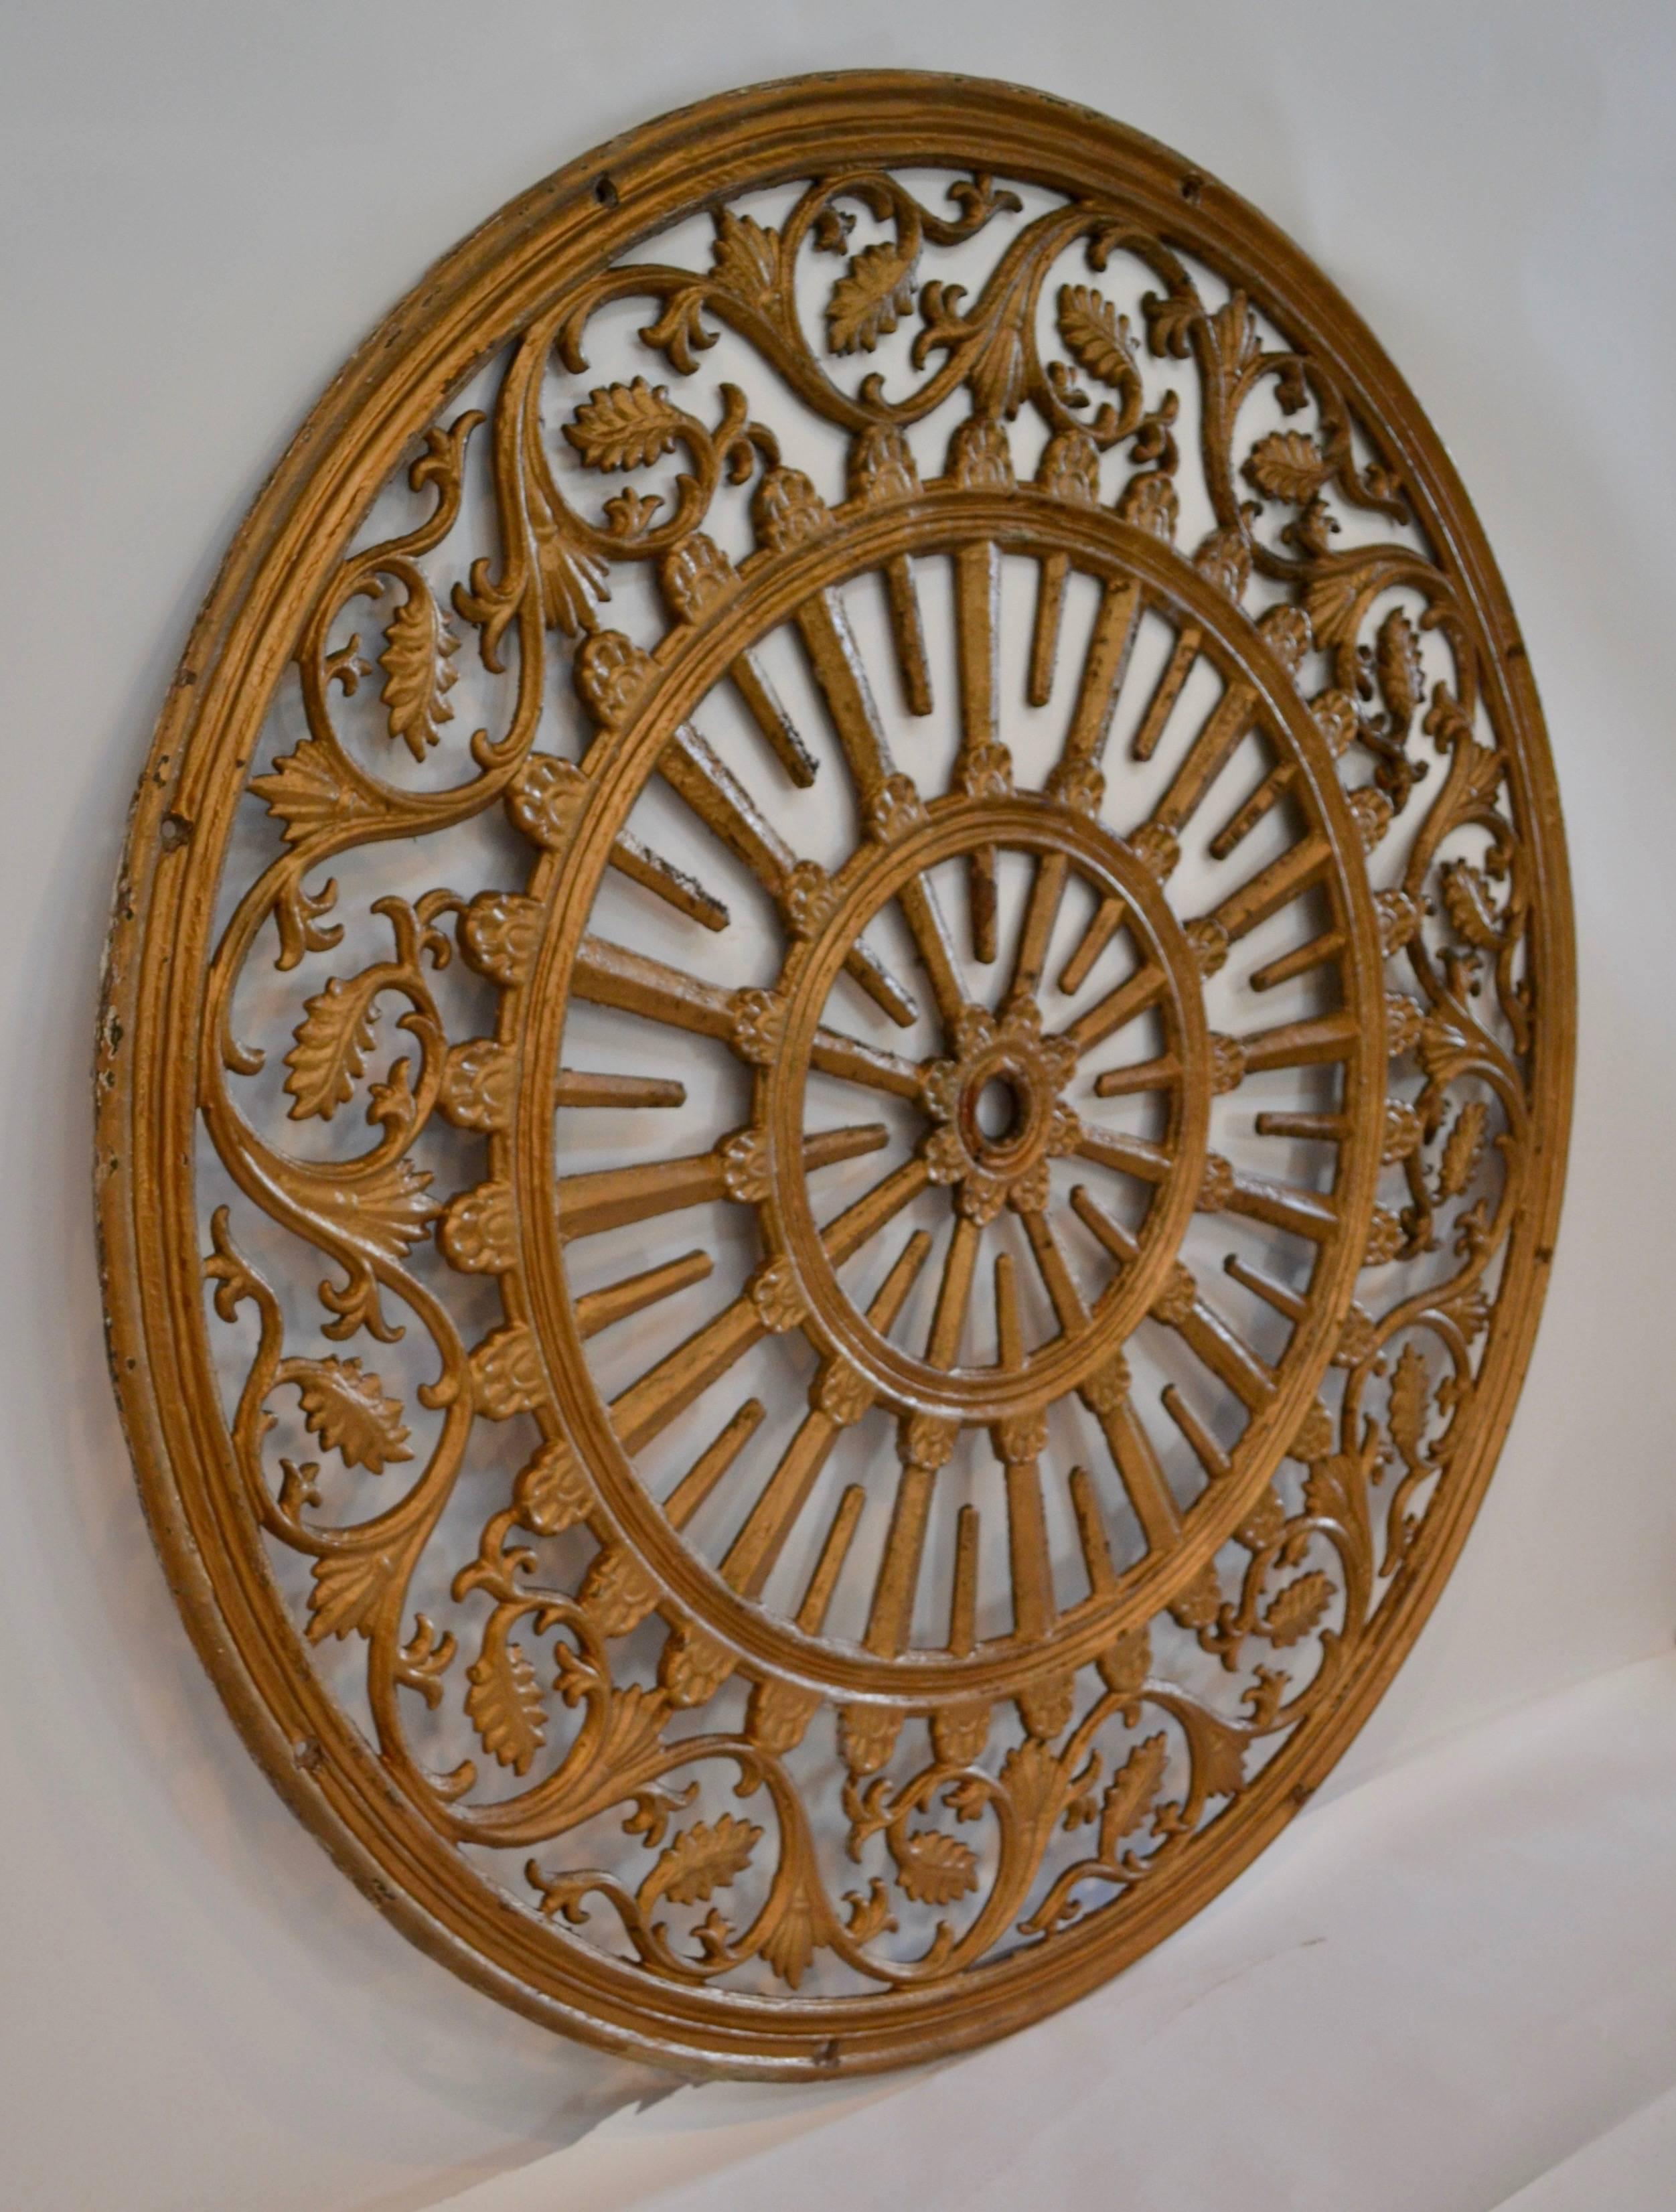 A massive ceiling medallion in gold paint over cast iron which graced the central nave ceiling of a Baltimore church renovated by the celebrated Baltimore architect George Lino (Peabody Institure) in 1870.  Rarely found in this material and size, it